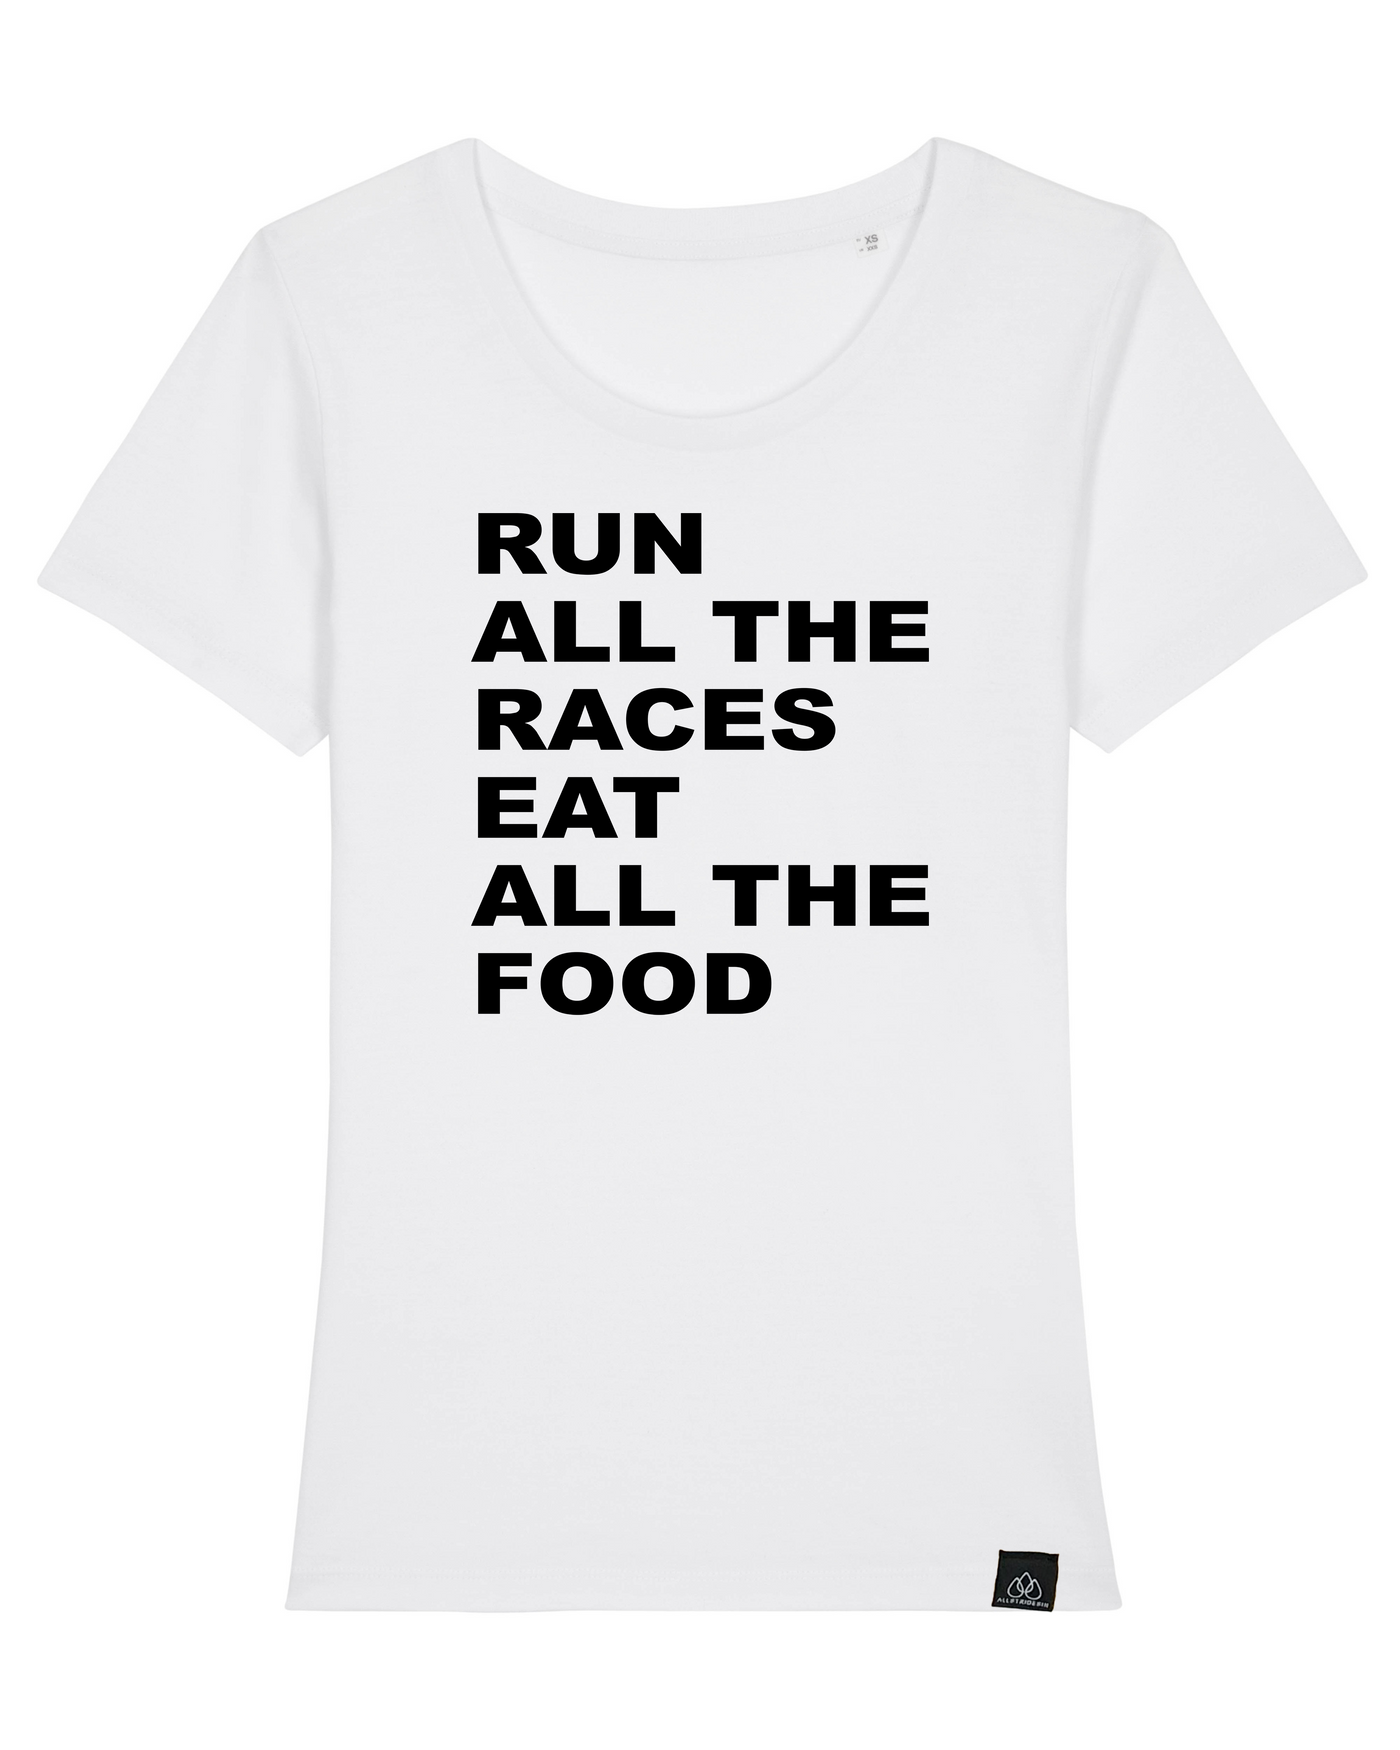 Run all the races eat all the food Lady T-Shirt